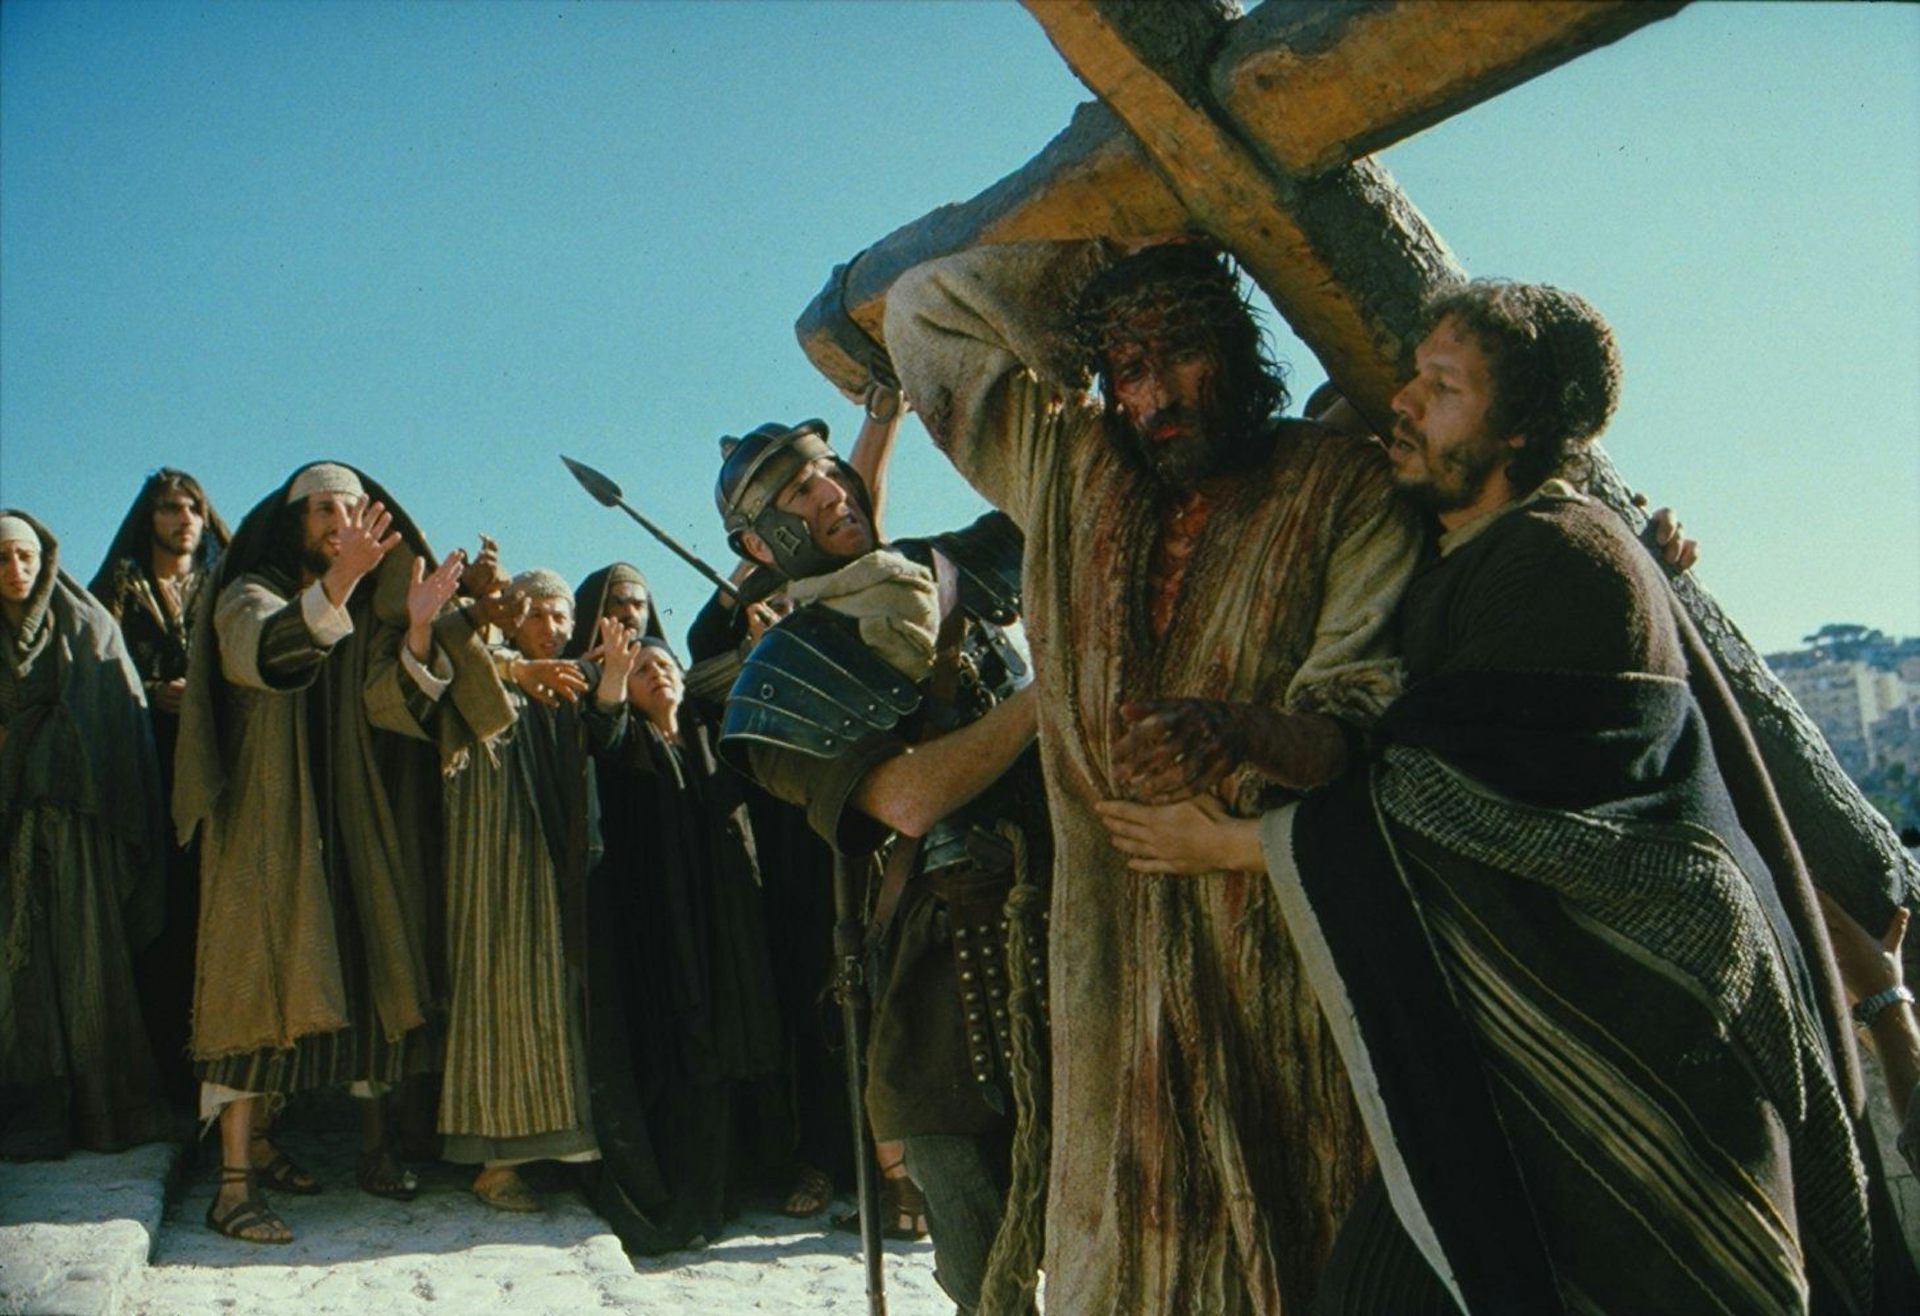 pictures from the passion of christ movie